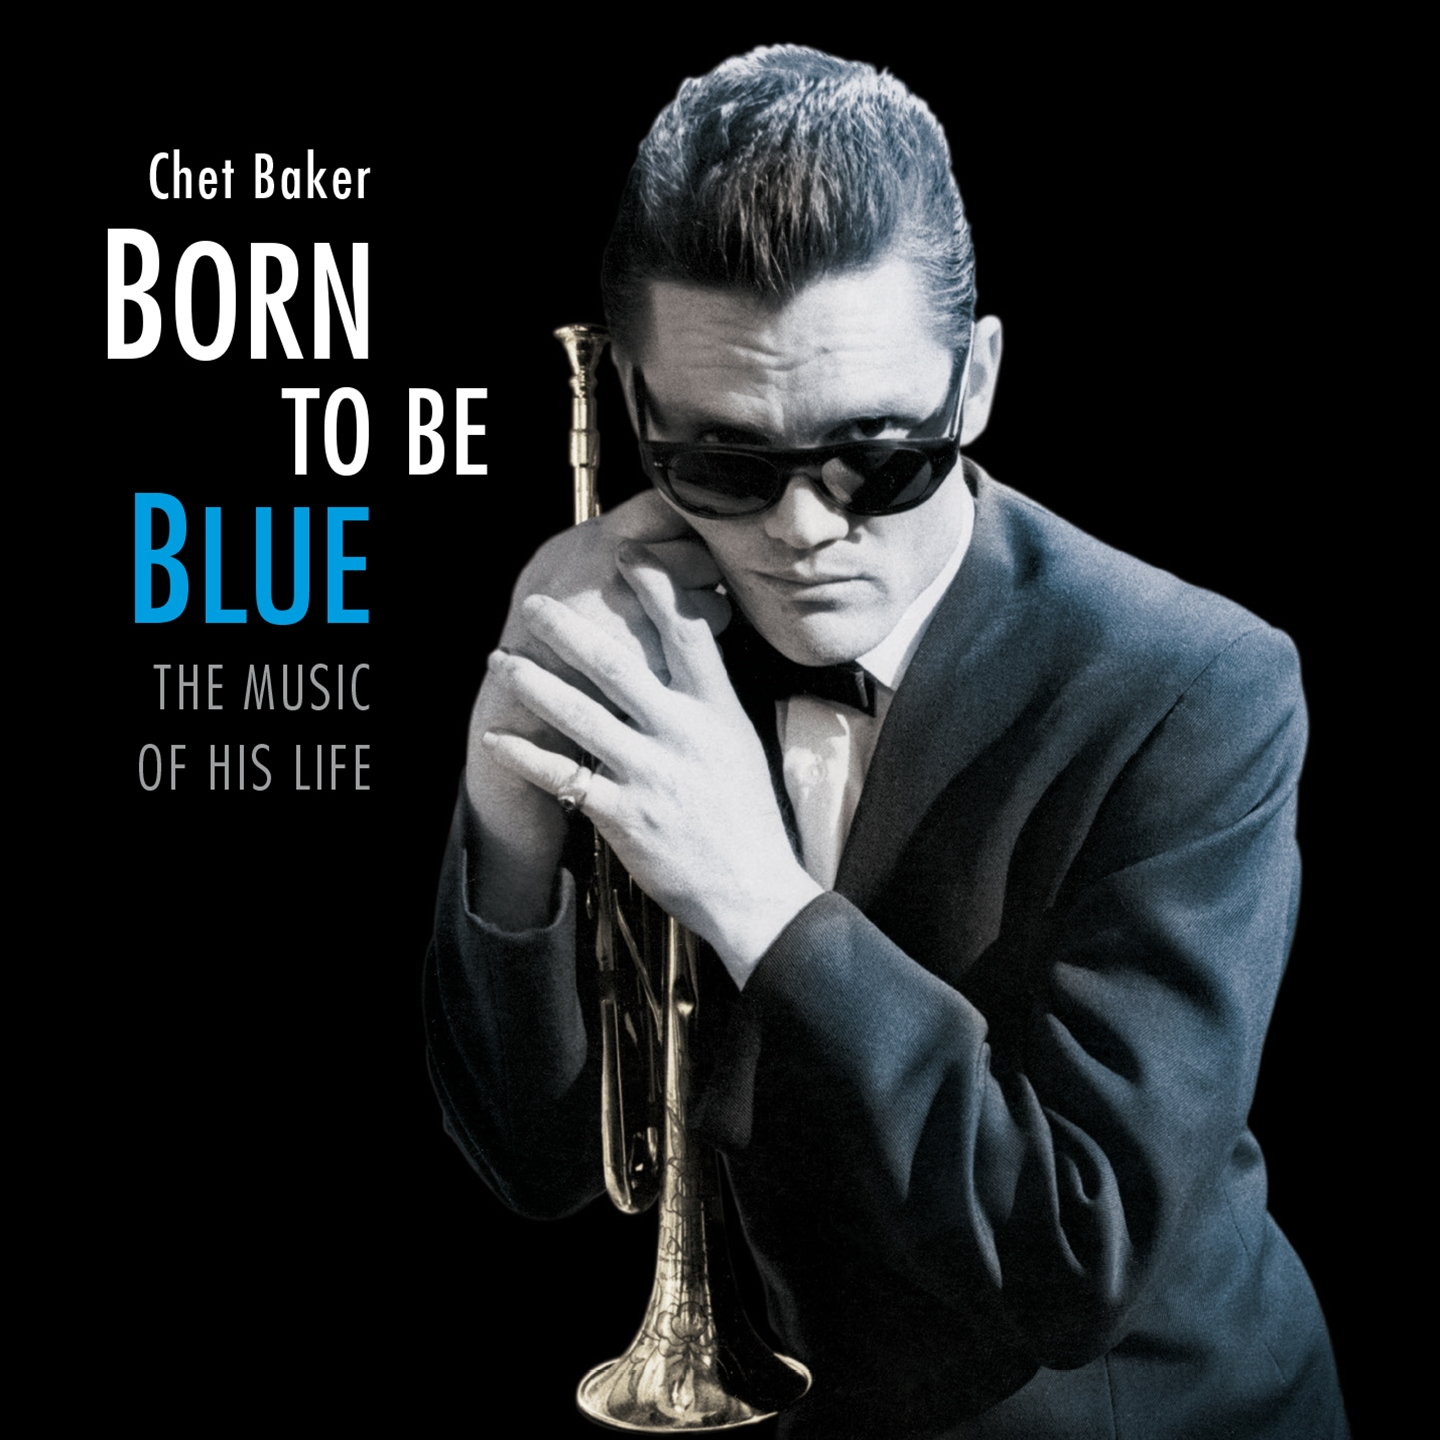 BORN TO BE BLUE - THE MUSIC OF HIS LIFE